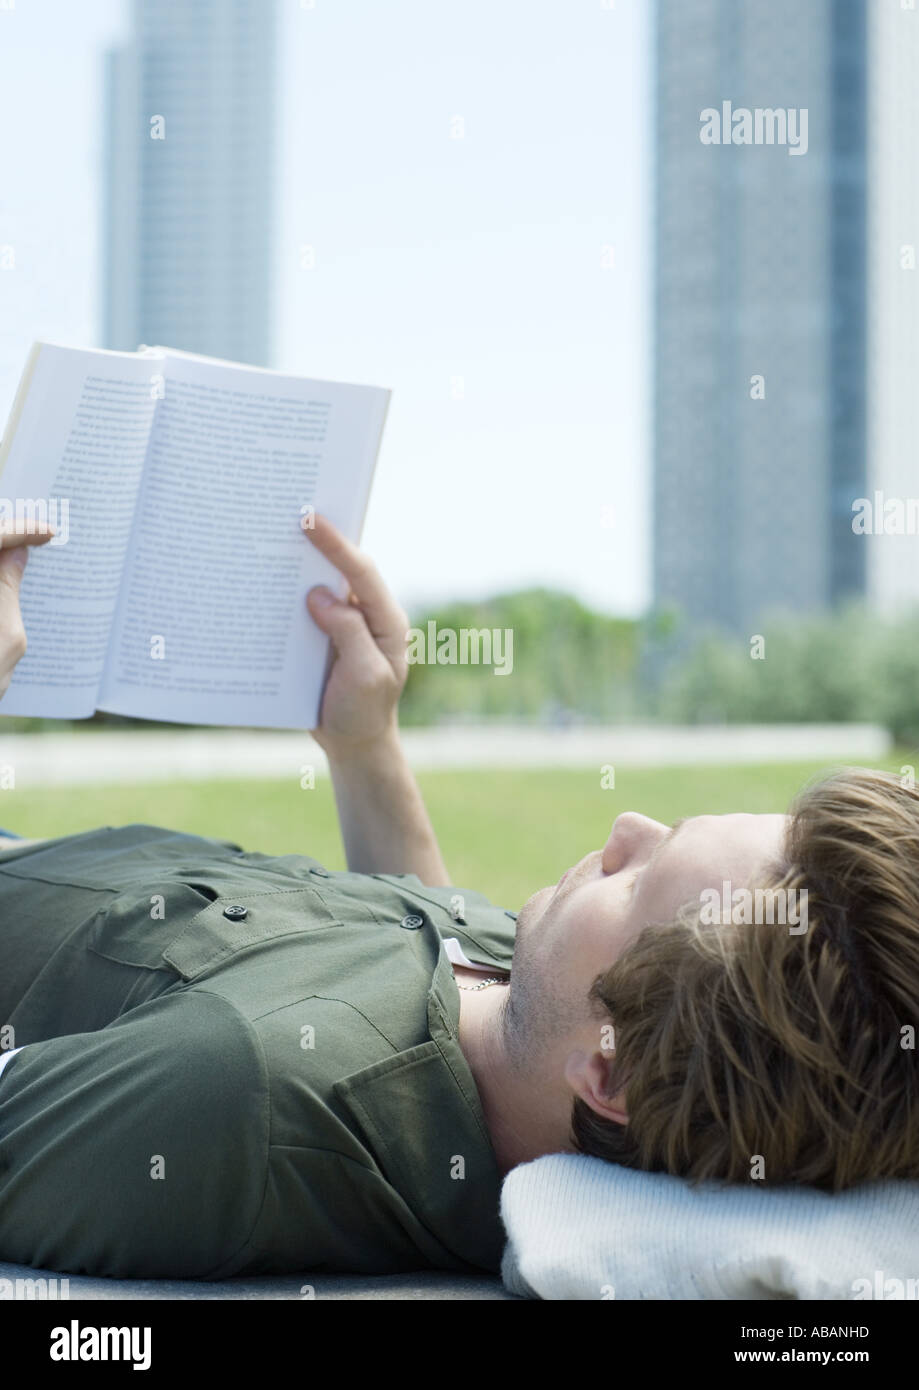 Young man reading in city park, close-up Stock Photo